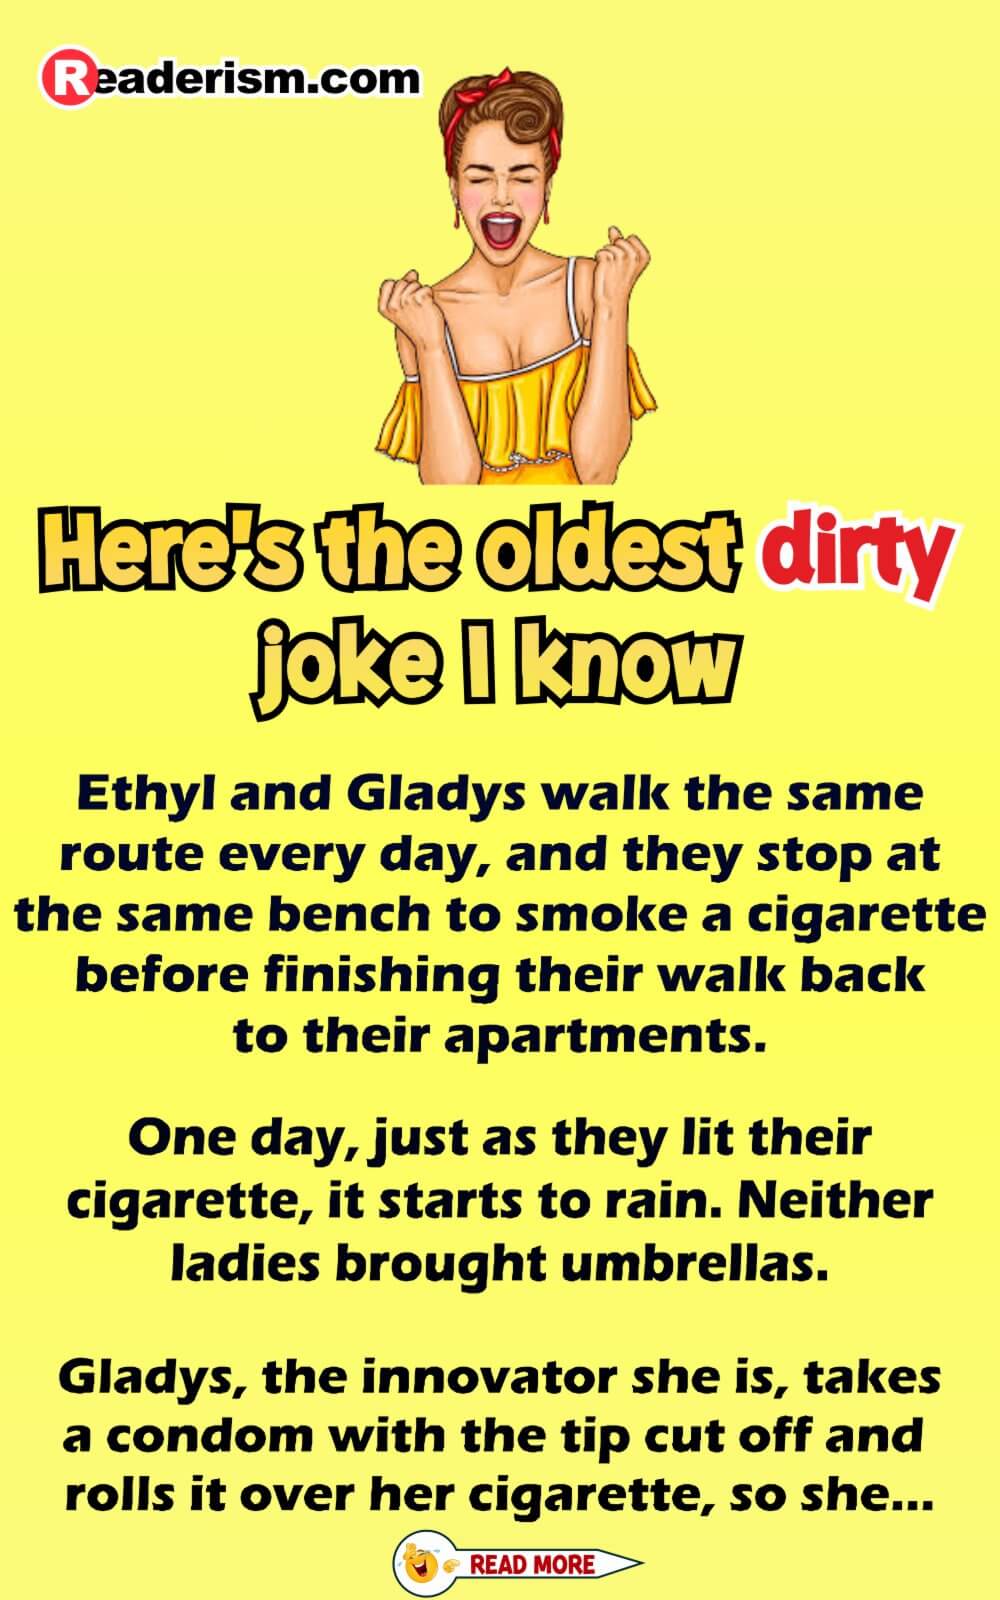 Here's the Oldest Dirty Joke I Know - Funny Readerism Jokes